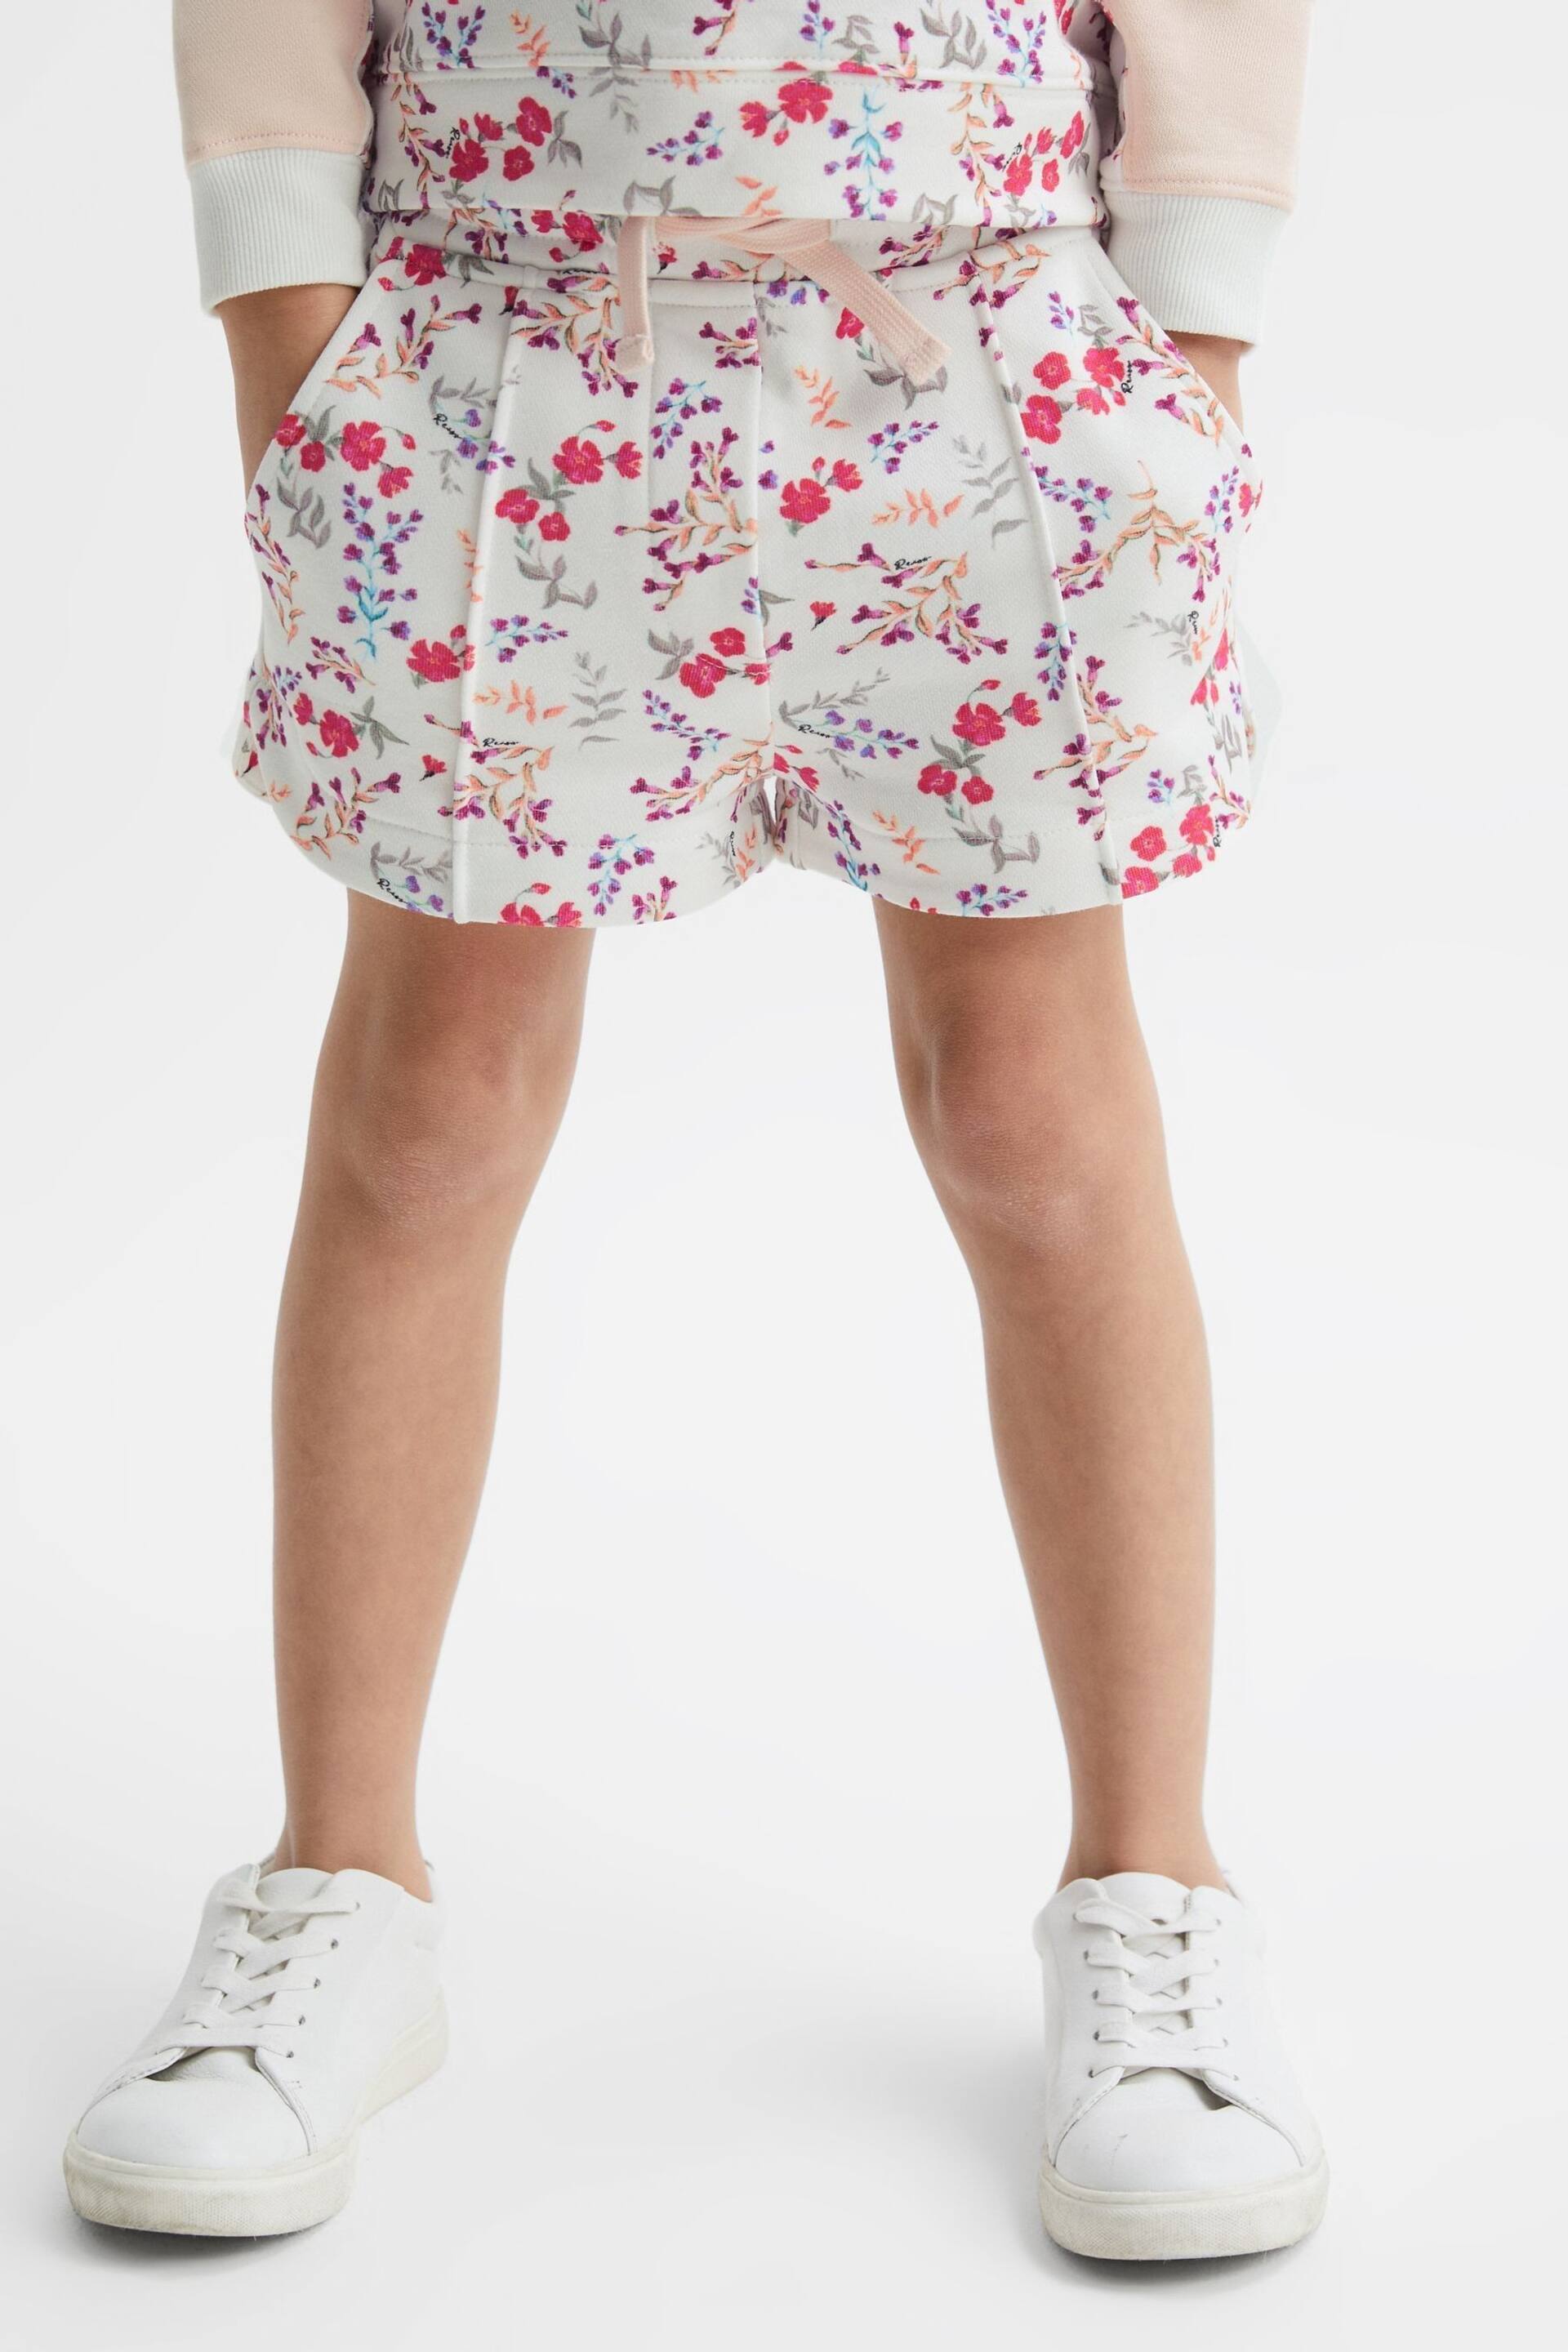 Reiss Pink Print Harper Senior Relaxed Floral Printed Shorts - Image 3 of 6